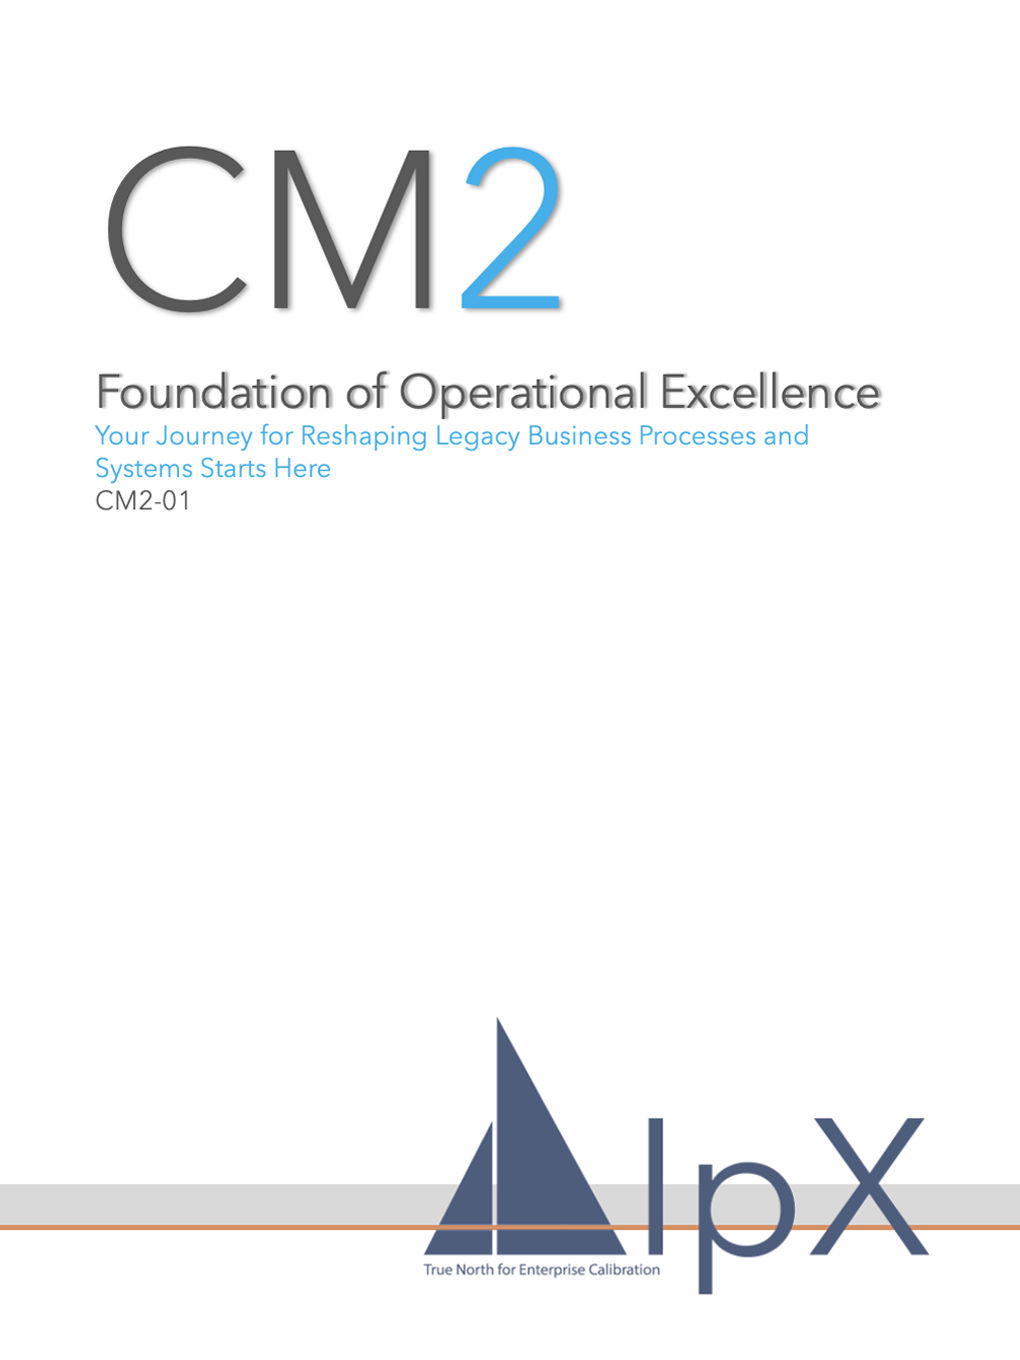 Foundation of Operational Excellence Course